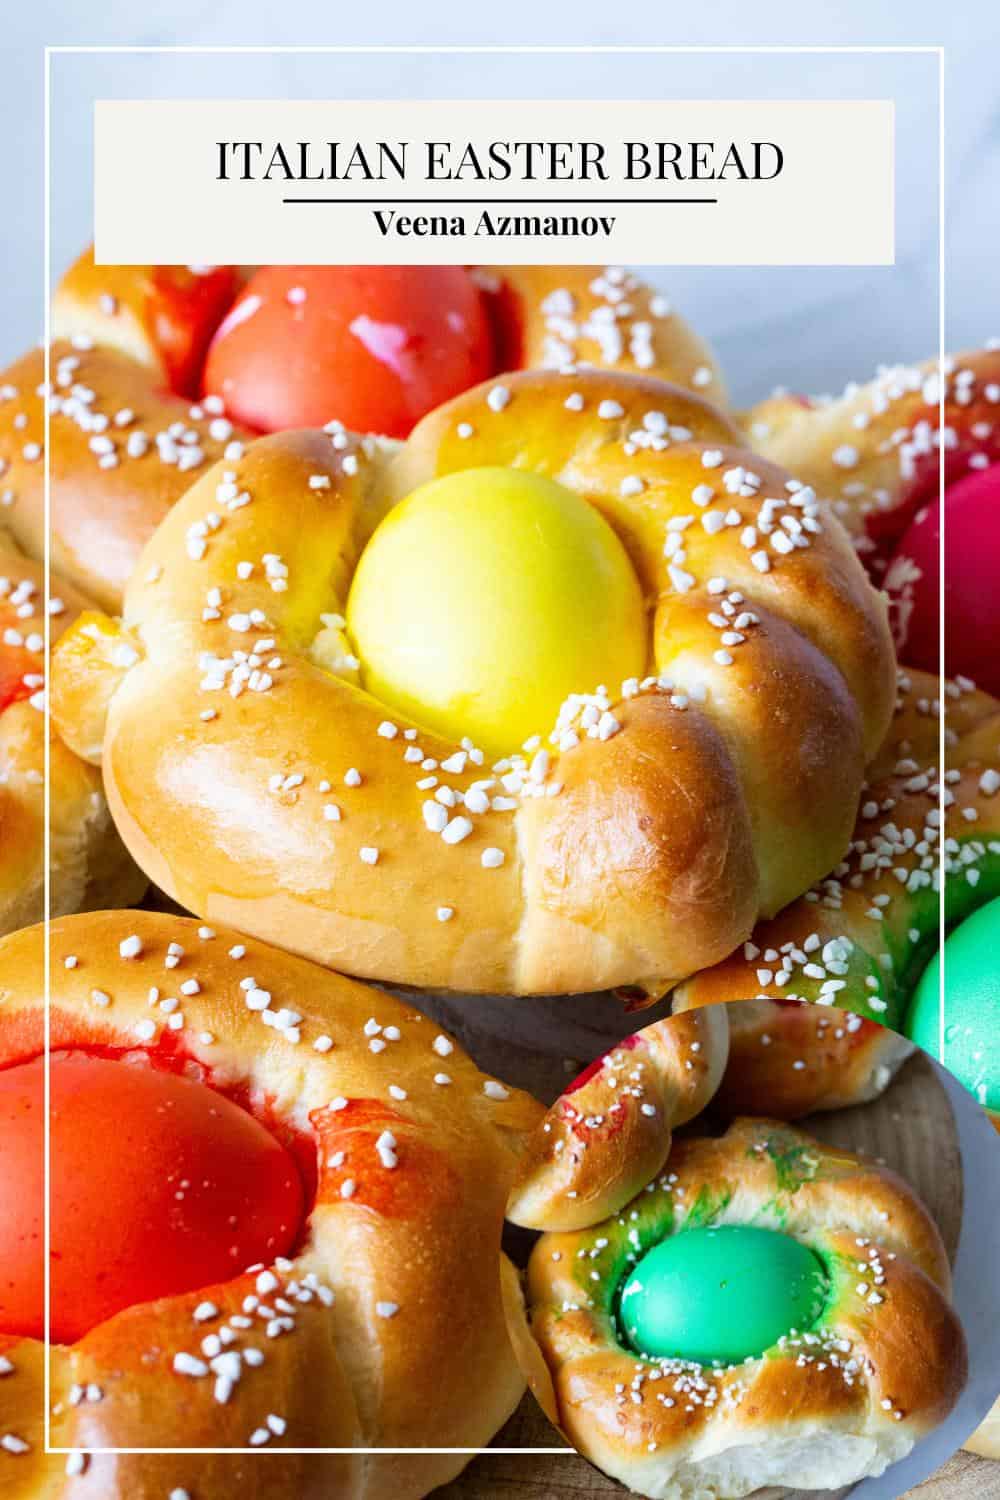 Pinterest image for Bread with colored eggs for Easter.